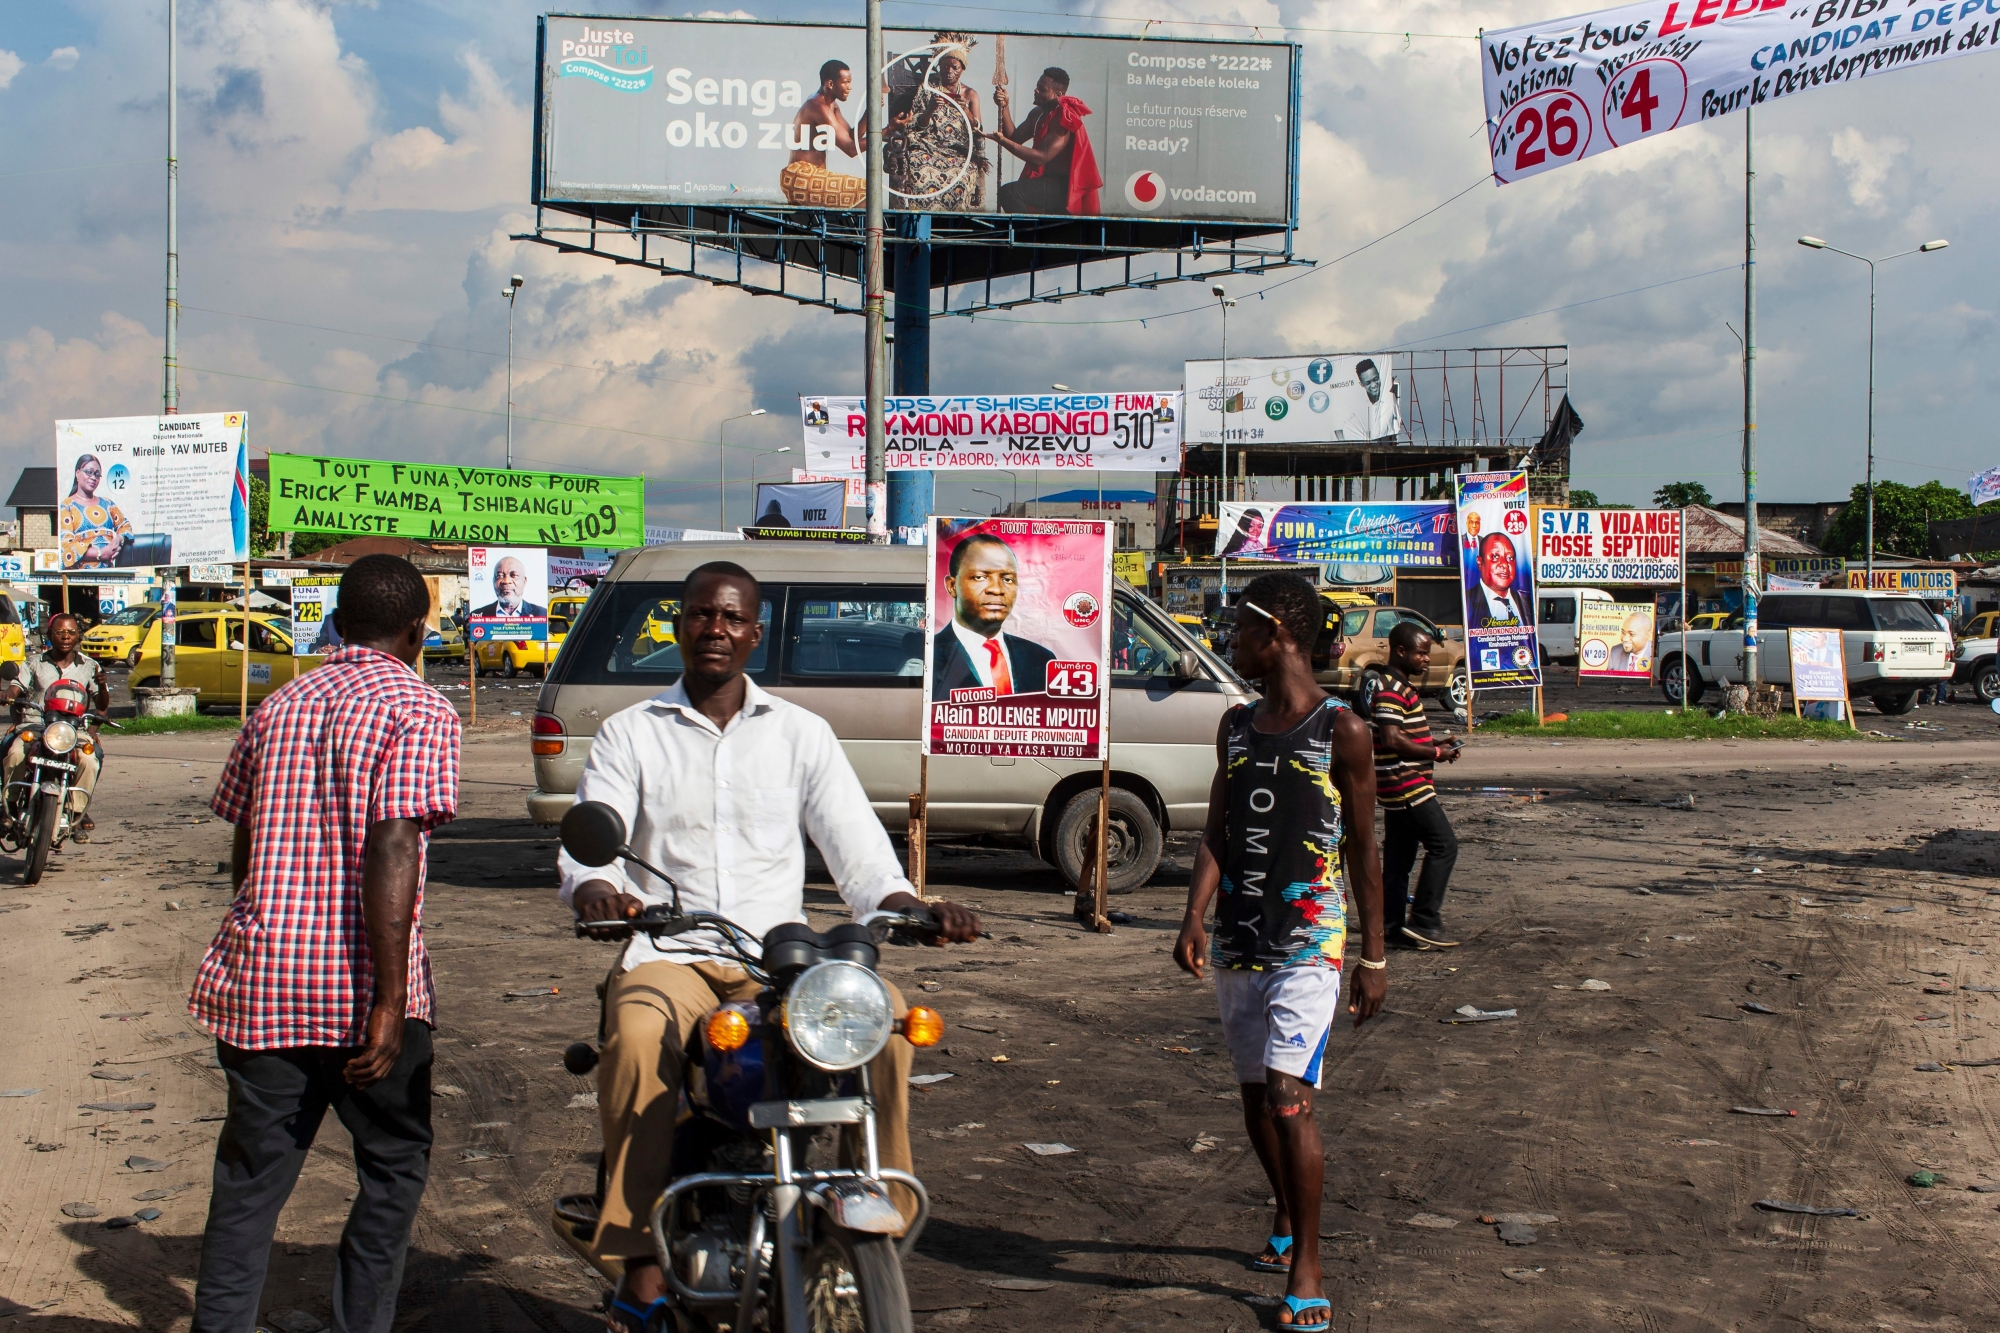 epa07242615 Election campaign posters are seen in a busy street in Kinshasa, Democratic Republic of Congo, 20 December 2018. The head of Congo's electoral commission Corneille Nangaa announced on 20 December that the poll, orignially scheduled for 23 December will be delayed by one week until 30 December, citing the recent fire that destroyed 80 percent of the voting machines. Emmanuel Ramazani Shadary, the ruling party candidate and a loyalist of outgoing president Joseph Kabila, faces challenges posed by Felix Tshisekedi, the leader of the Union for Democracy and Social Progress (UDPS) party, and the joint opposition candidate Martin Fayulu.  EPA/STEFAN KLEINOWITZ DR CONGO ELECTIONS